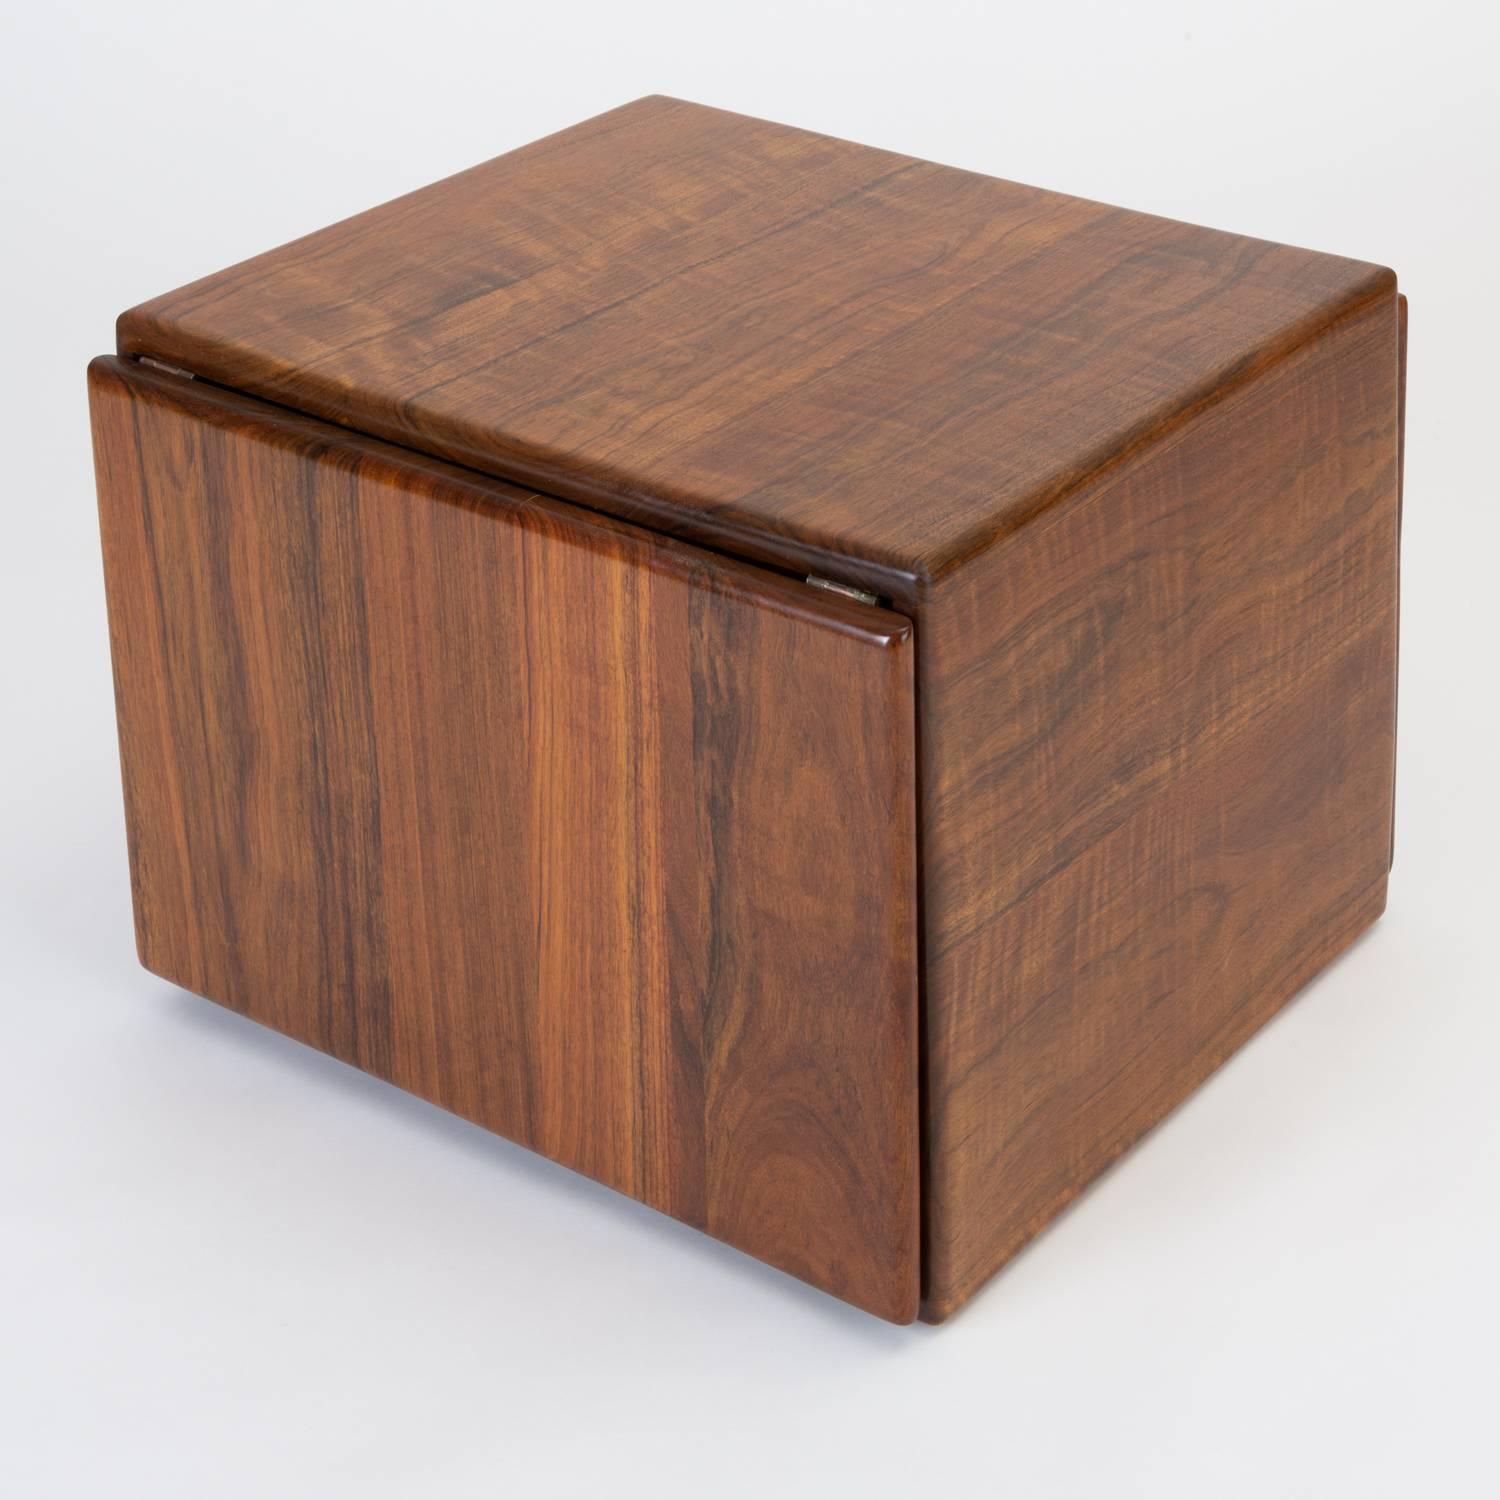 A storage cube side table, blanket box or storage chest designed and made by Gerald McCabe. McCabe, a Southern California woodworker produced this piece in lustrous shedua wood for his company, Erin Furniture. The cube has four smooth faces in solid